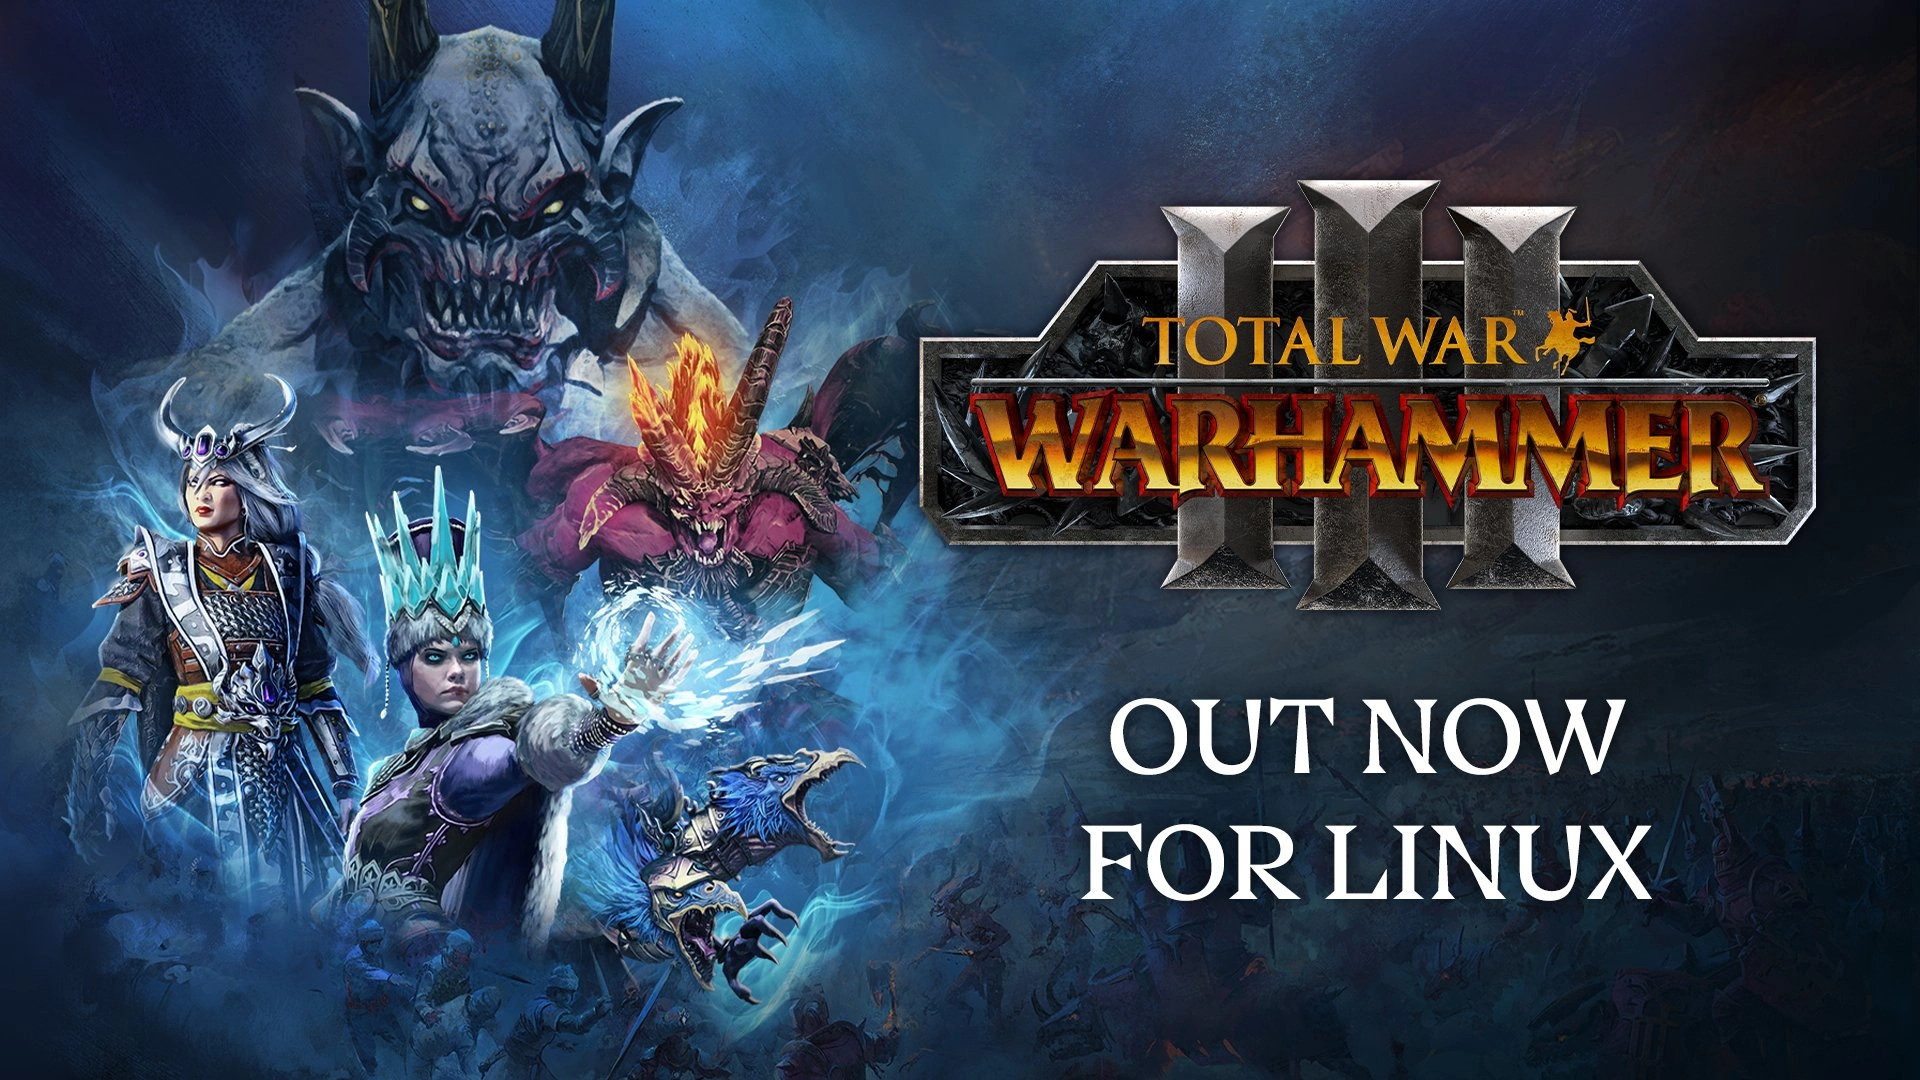 Total War: WARHAMMER III Is Out Now on Linux, Ported by Feral Interactive